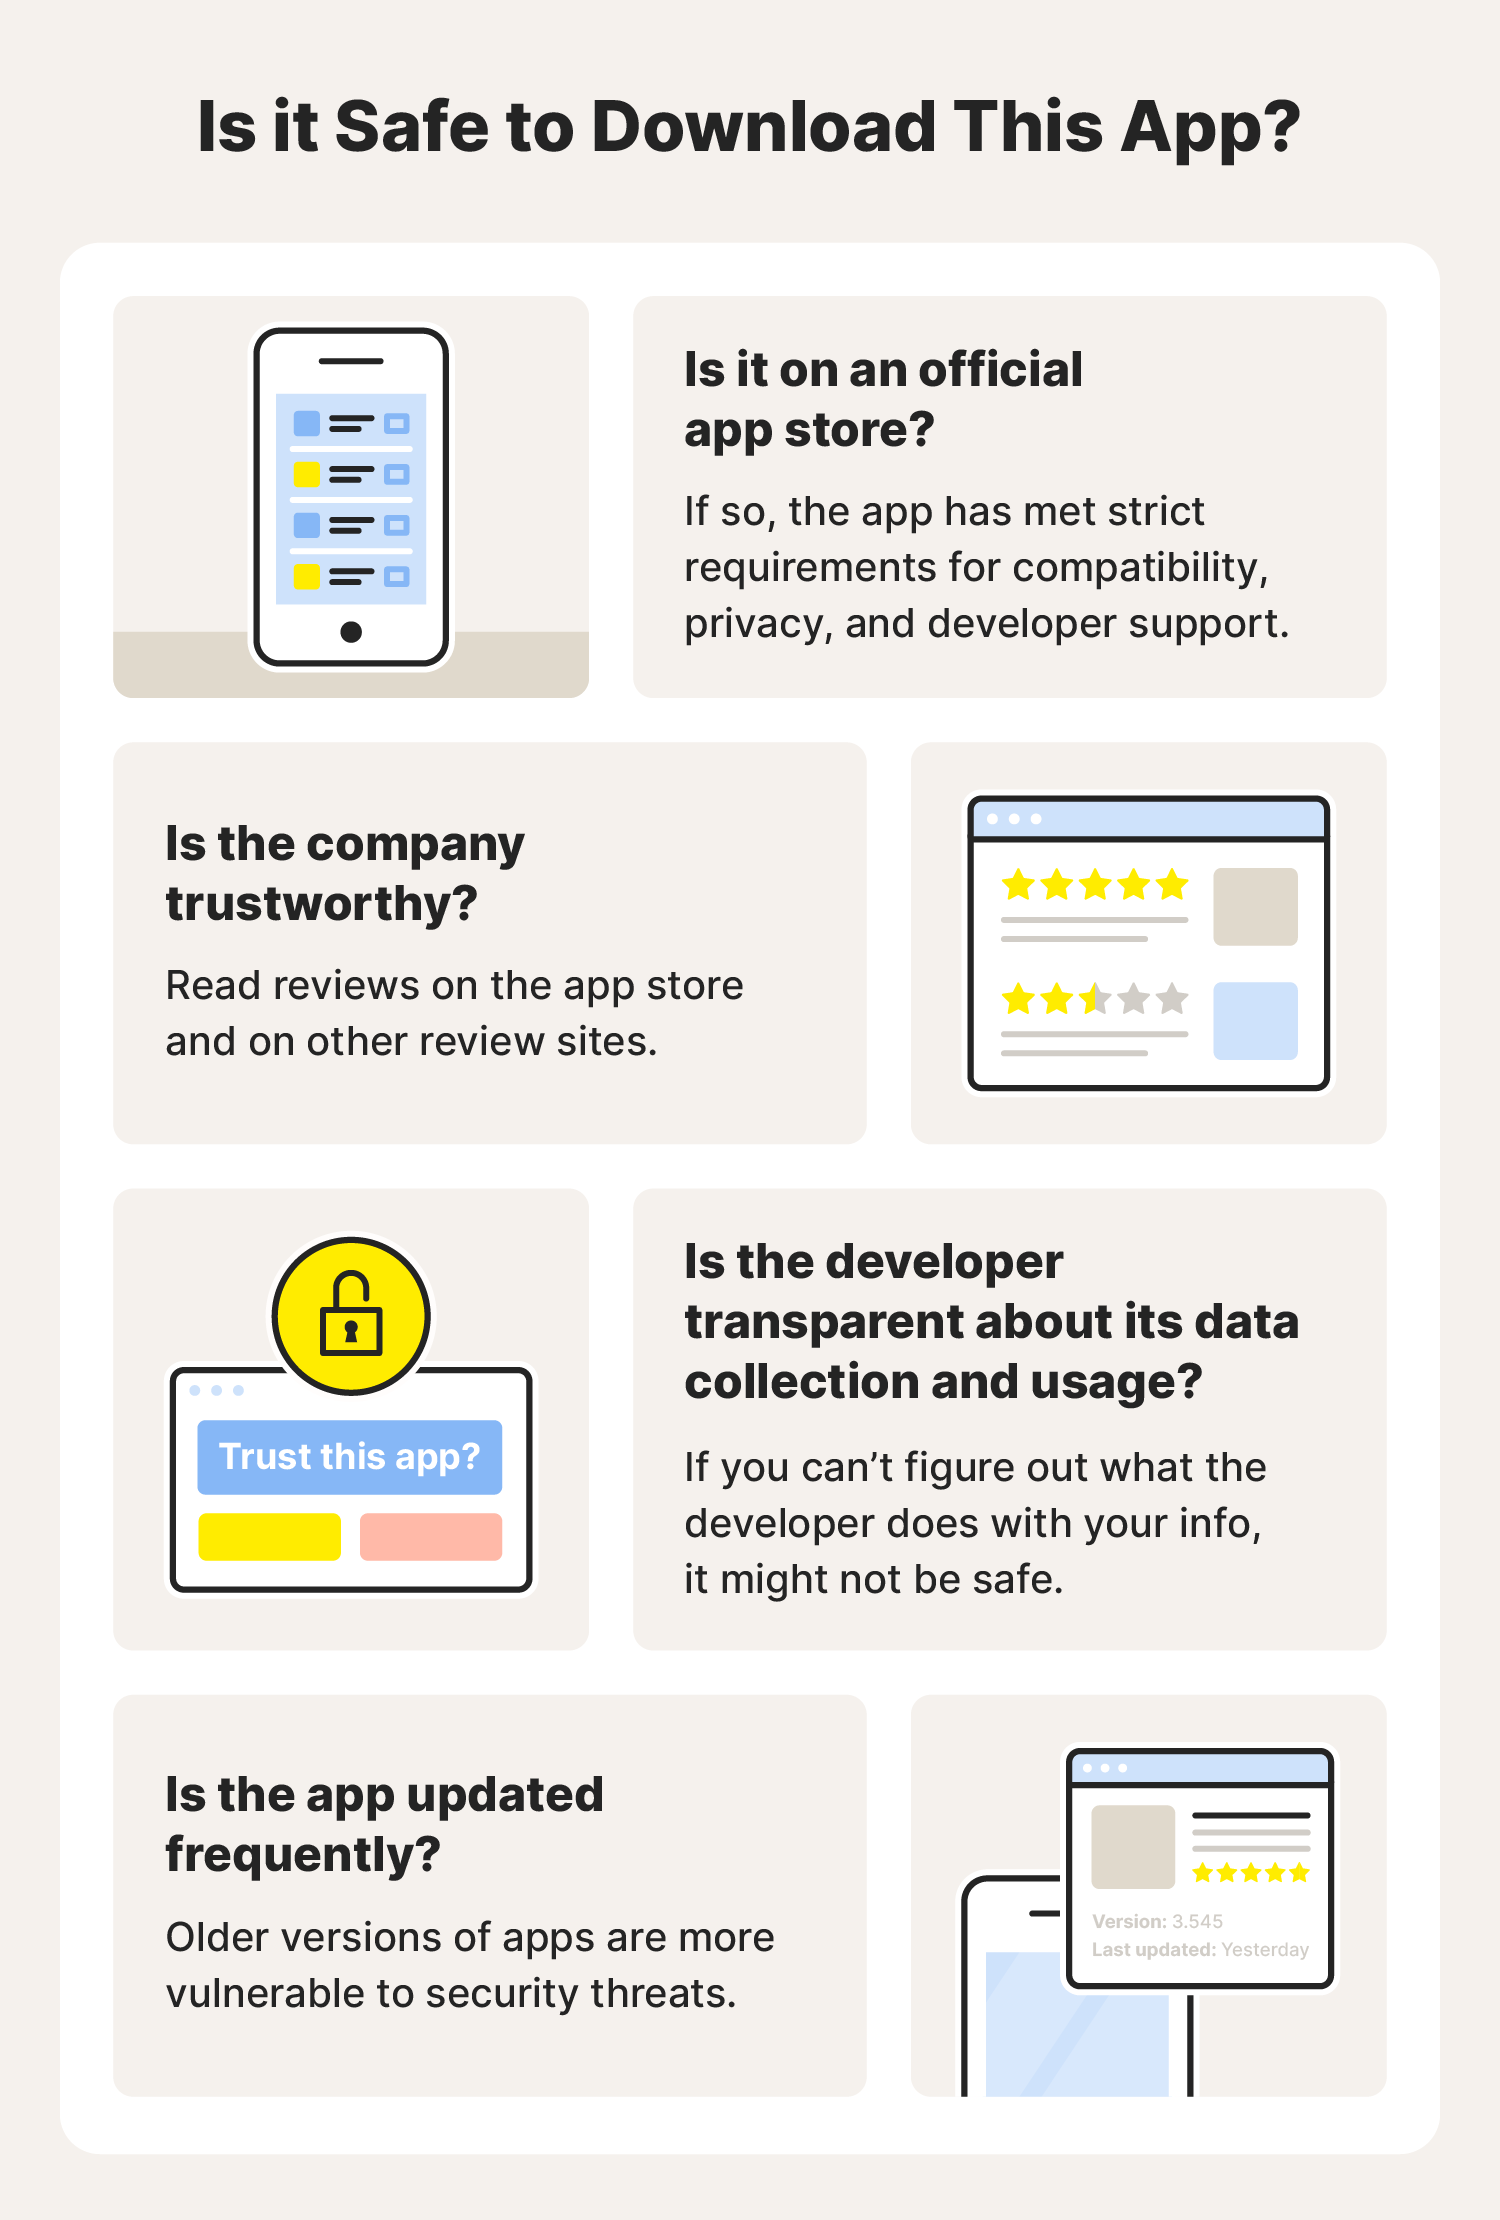 Chart providing information about whether an app is safe to download or not.